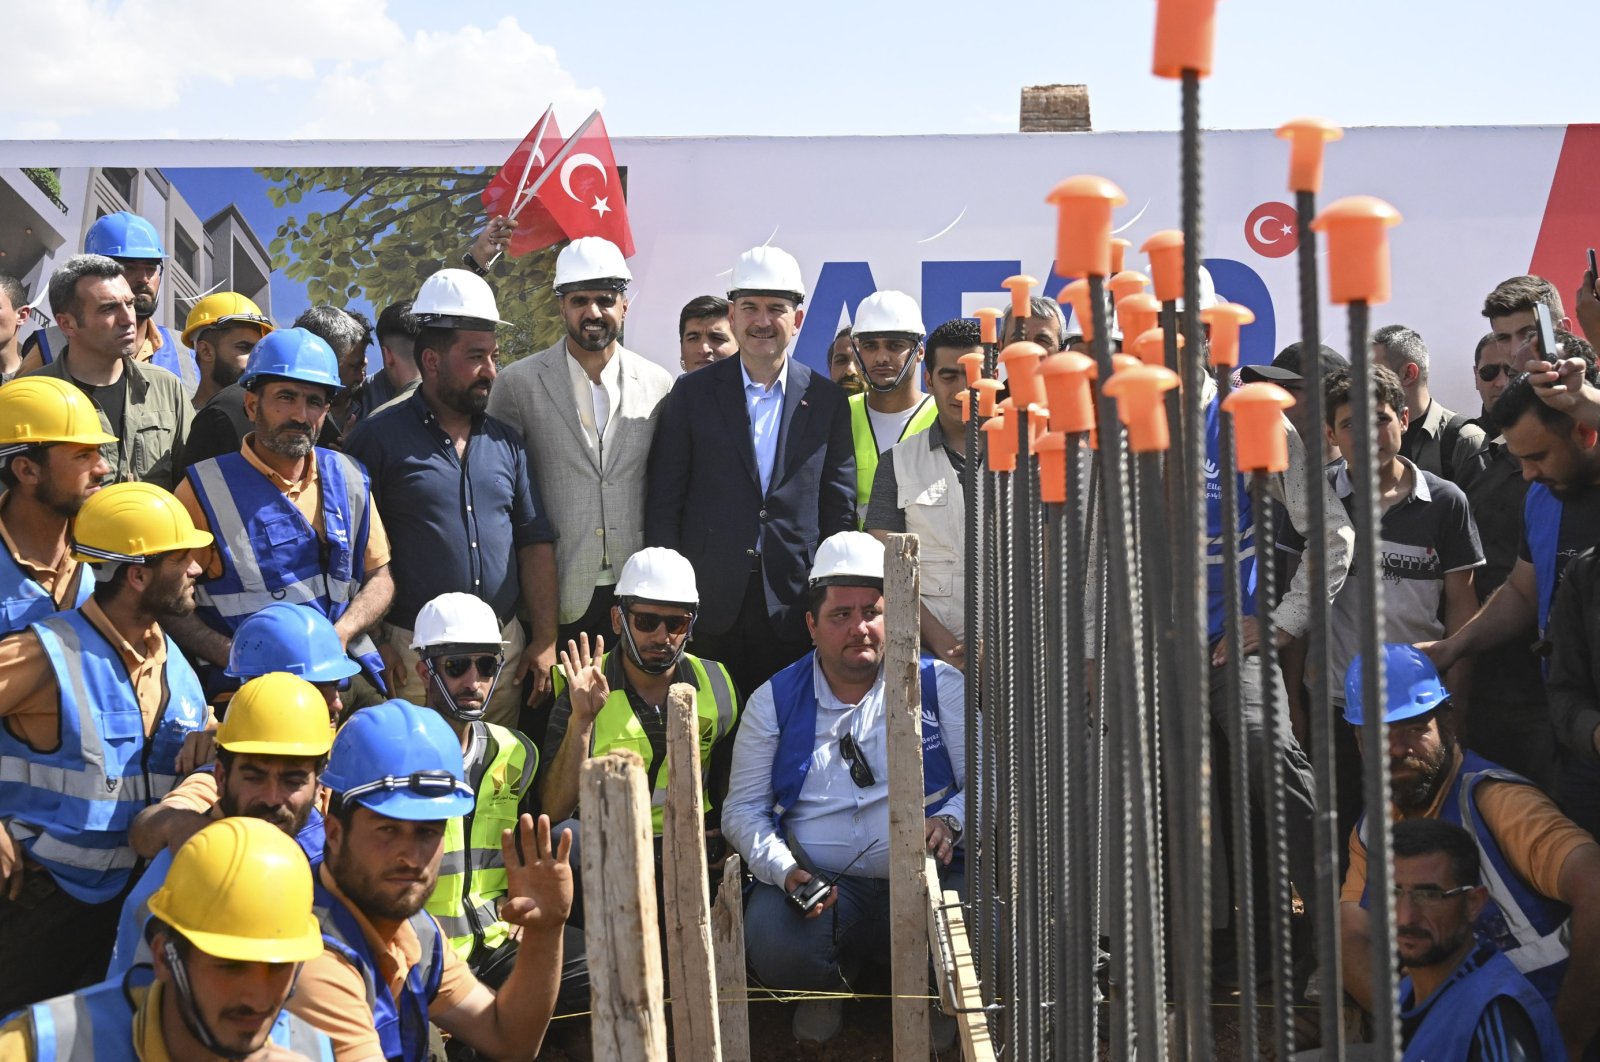 Interior Minister Süleyman Soylu (C) poses with a construction crew at the groundbreaking ceremony for the Voluntary, Safe, Honorable Return Project in Jarablus, northern Syria, May 24, 2023. (AA Photo)